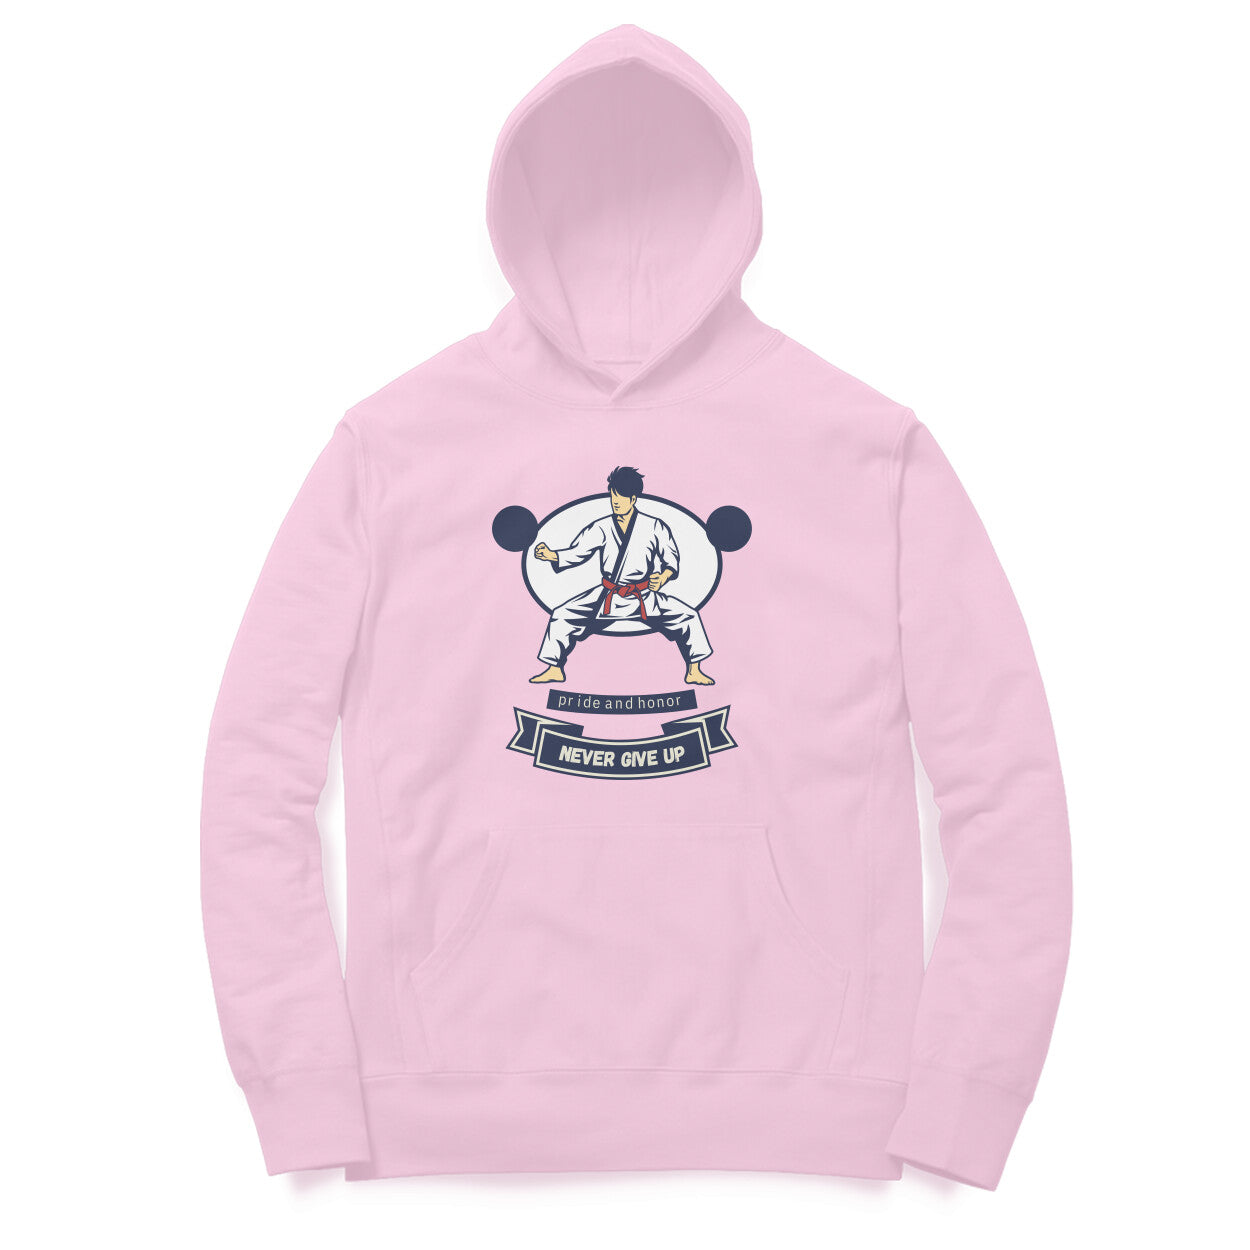 Bilkool Never Give Up Cotton Hoodies